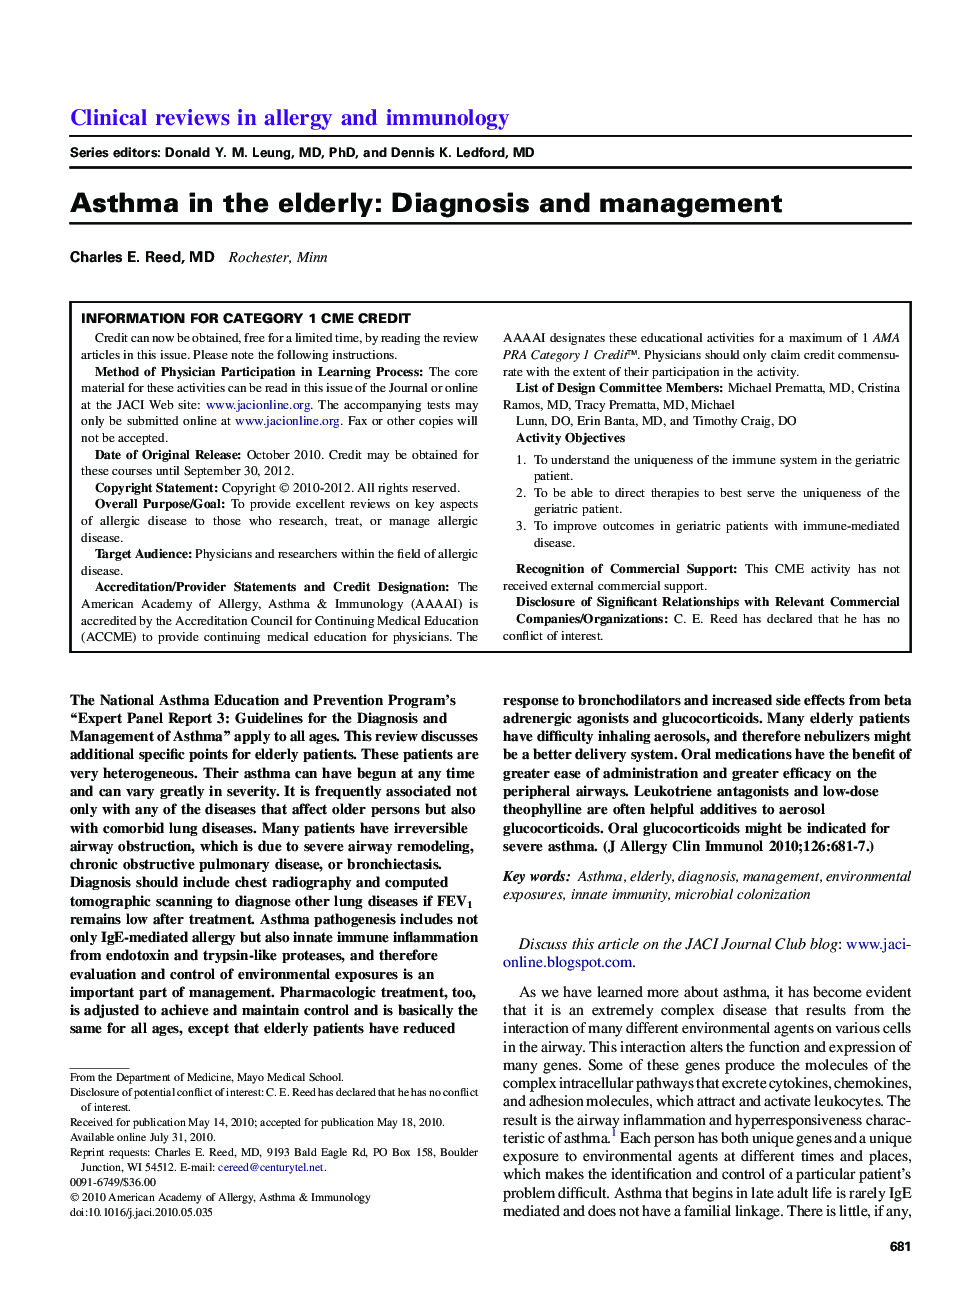 Asthma in the elderly: Diagnosis and management 